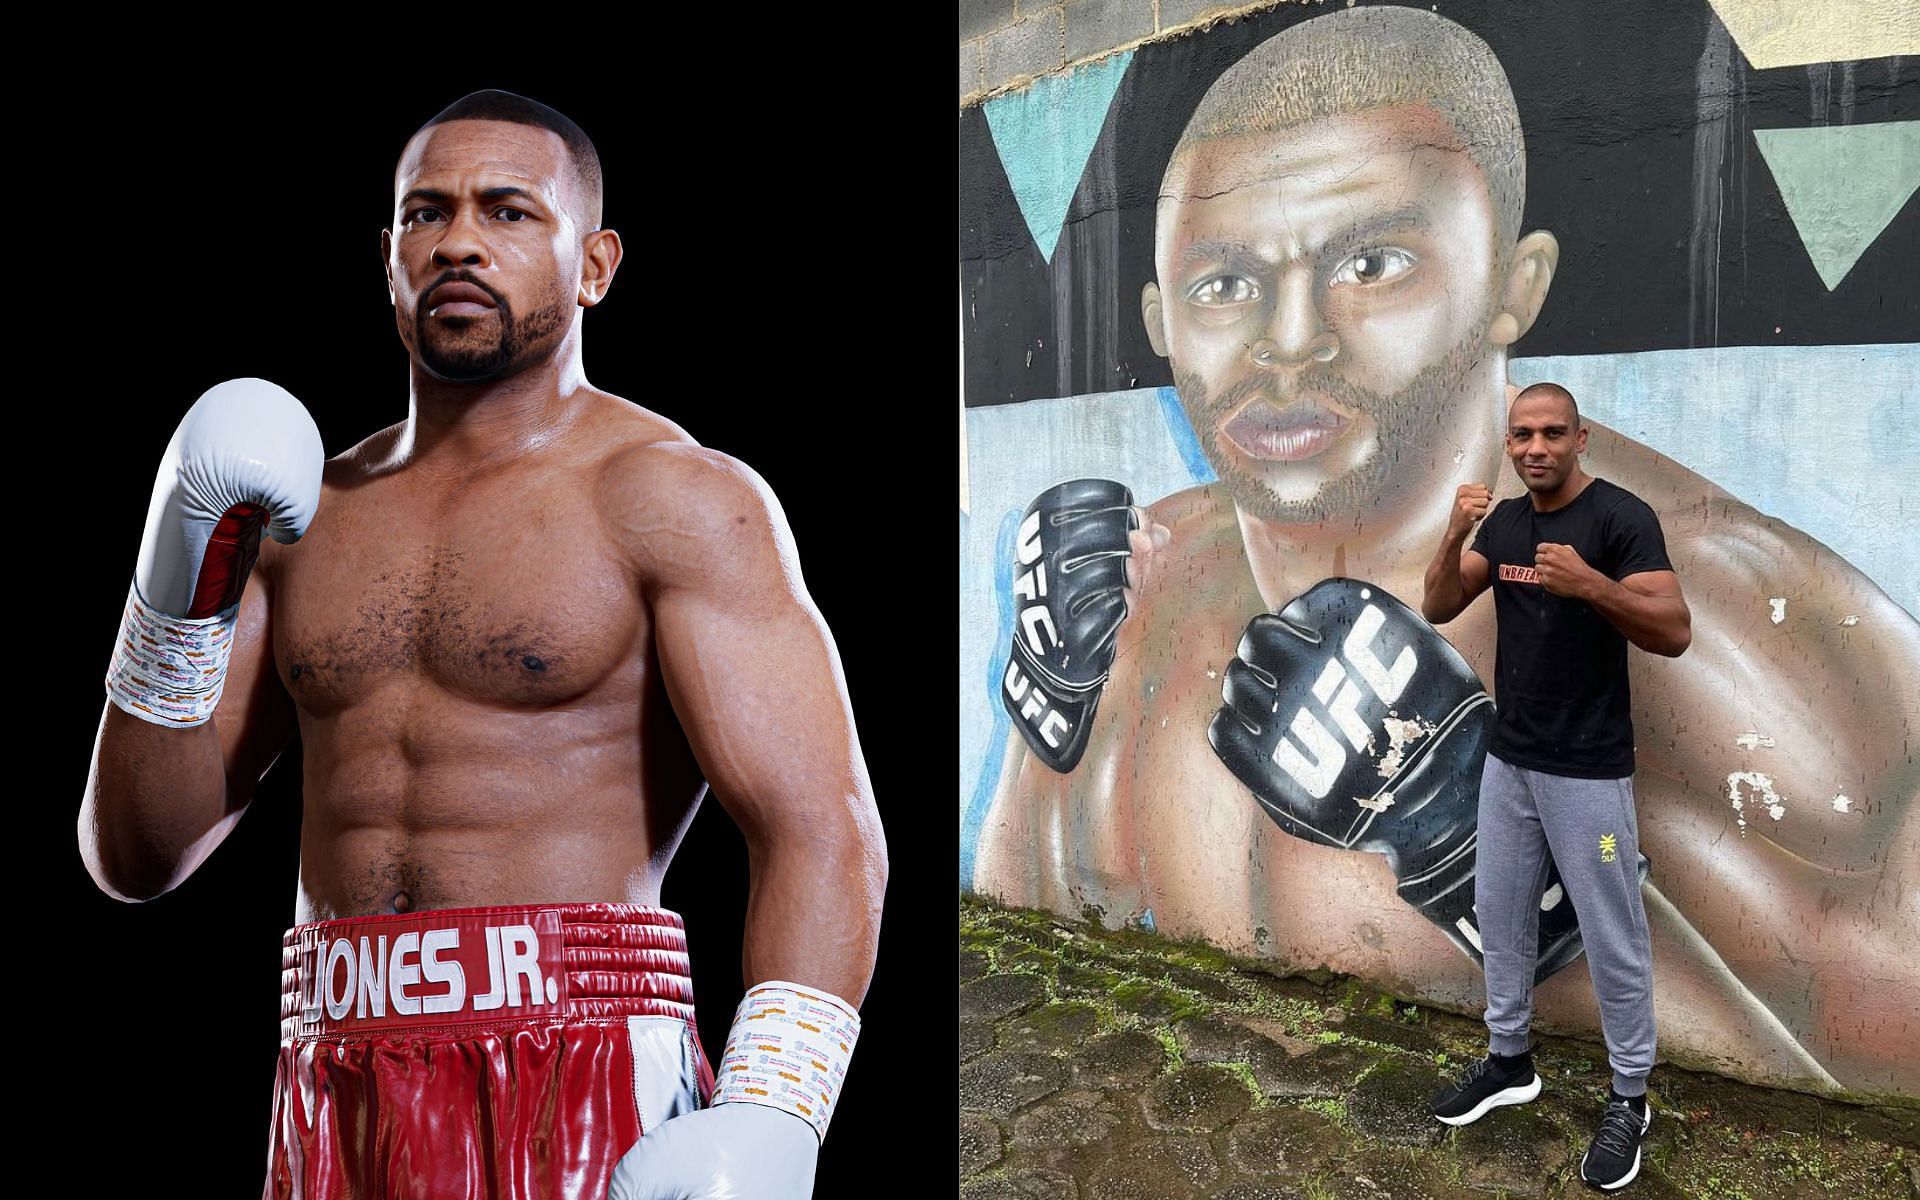 Roy Jones Jr. [Left] Edson Barboza next to his mural [Right] [Images courtesy: @RealRoyJonesJr and @mmamania (Twitter)